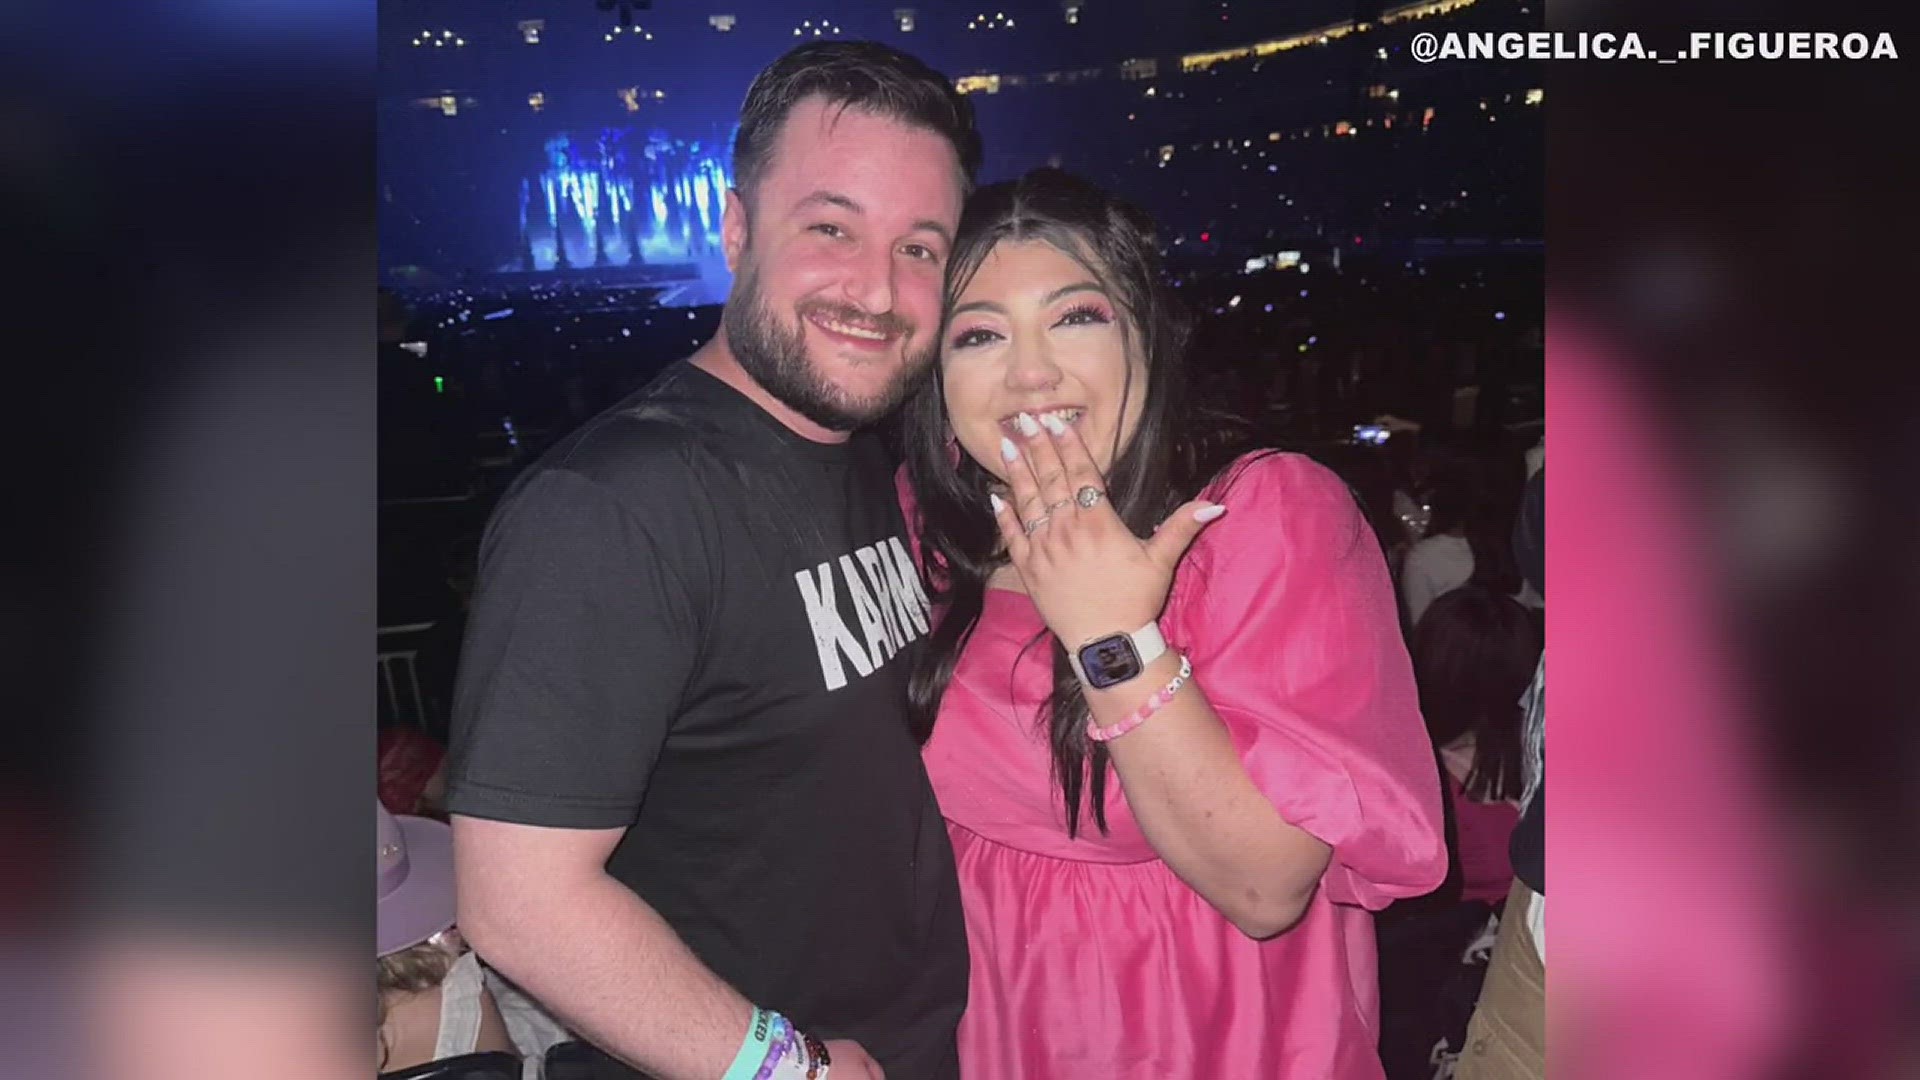 Michael Smith got down on one knee and popped the question to his girlfriend of three years, Angelica Figueroa, while Taylor Swift was performing "Love Story".